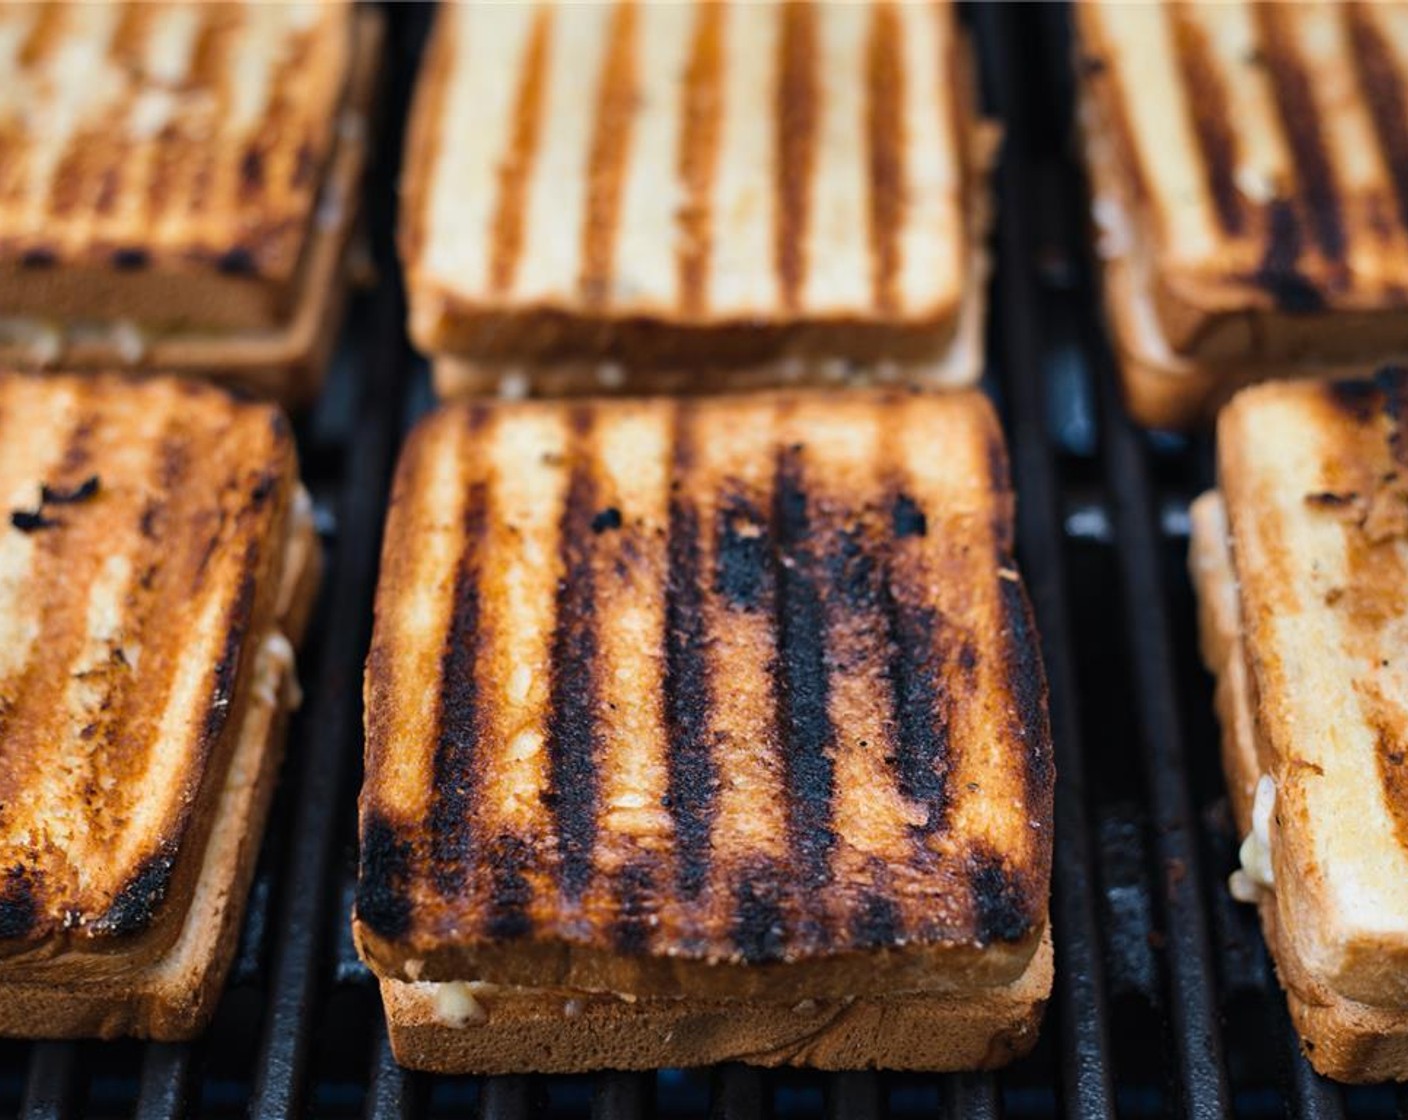 step 10 Grill for about 7 minutes on each side, until golden brown and the cheese is melted.